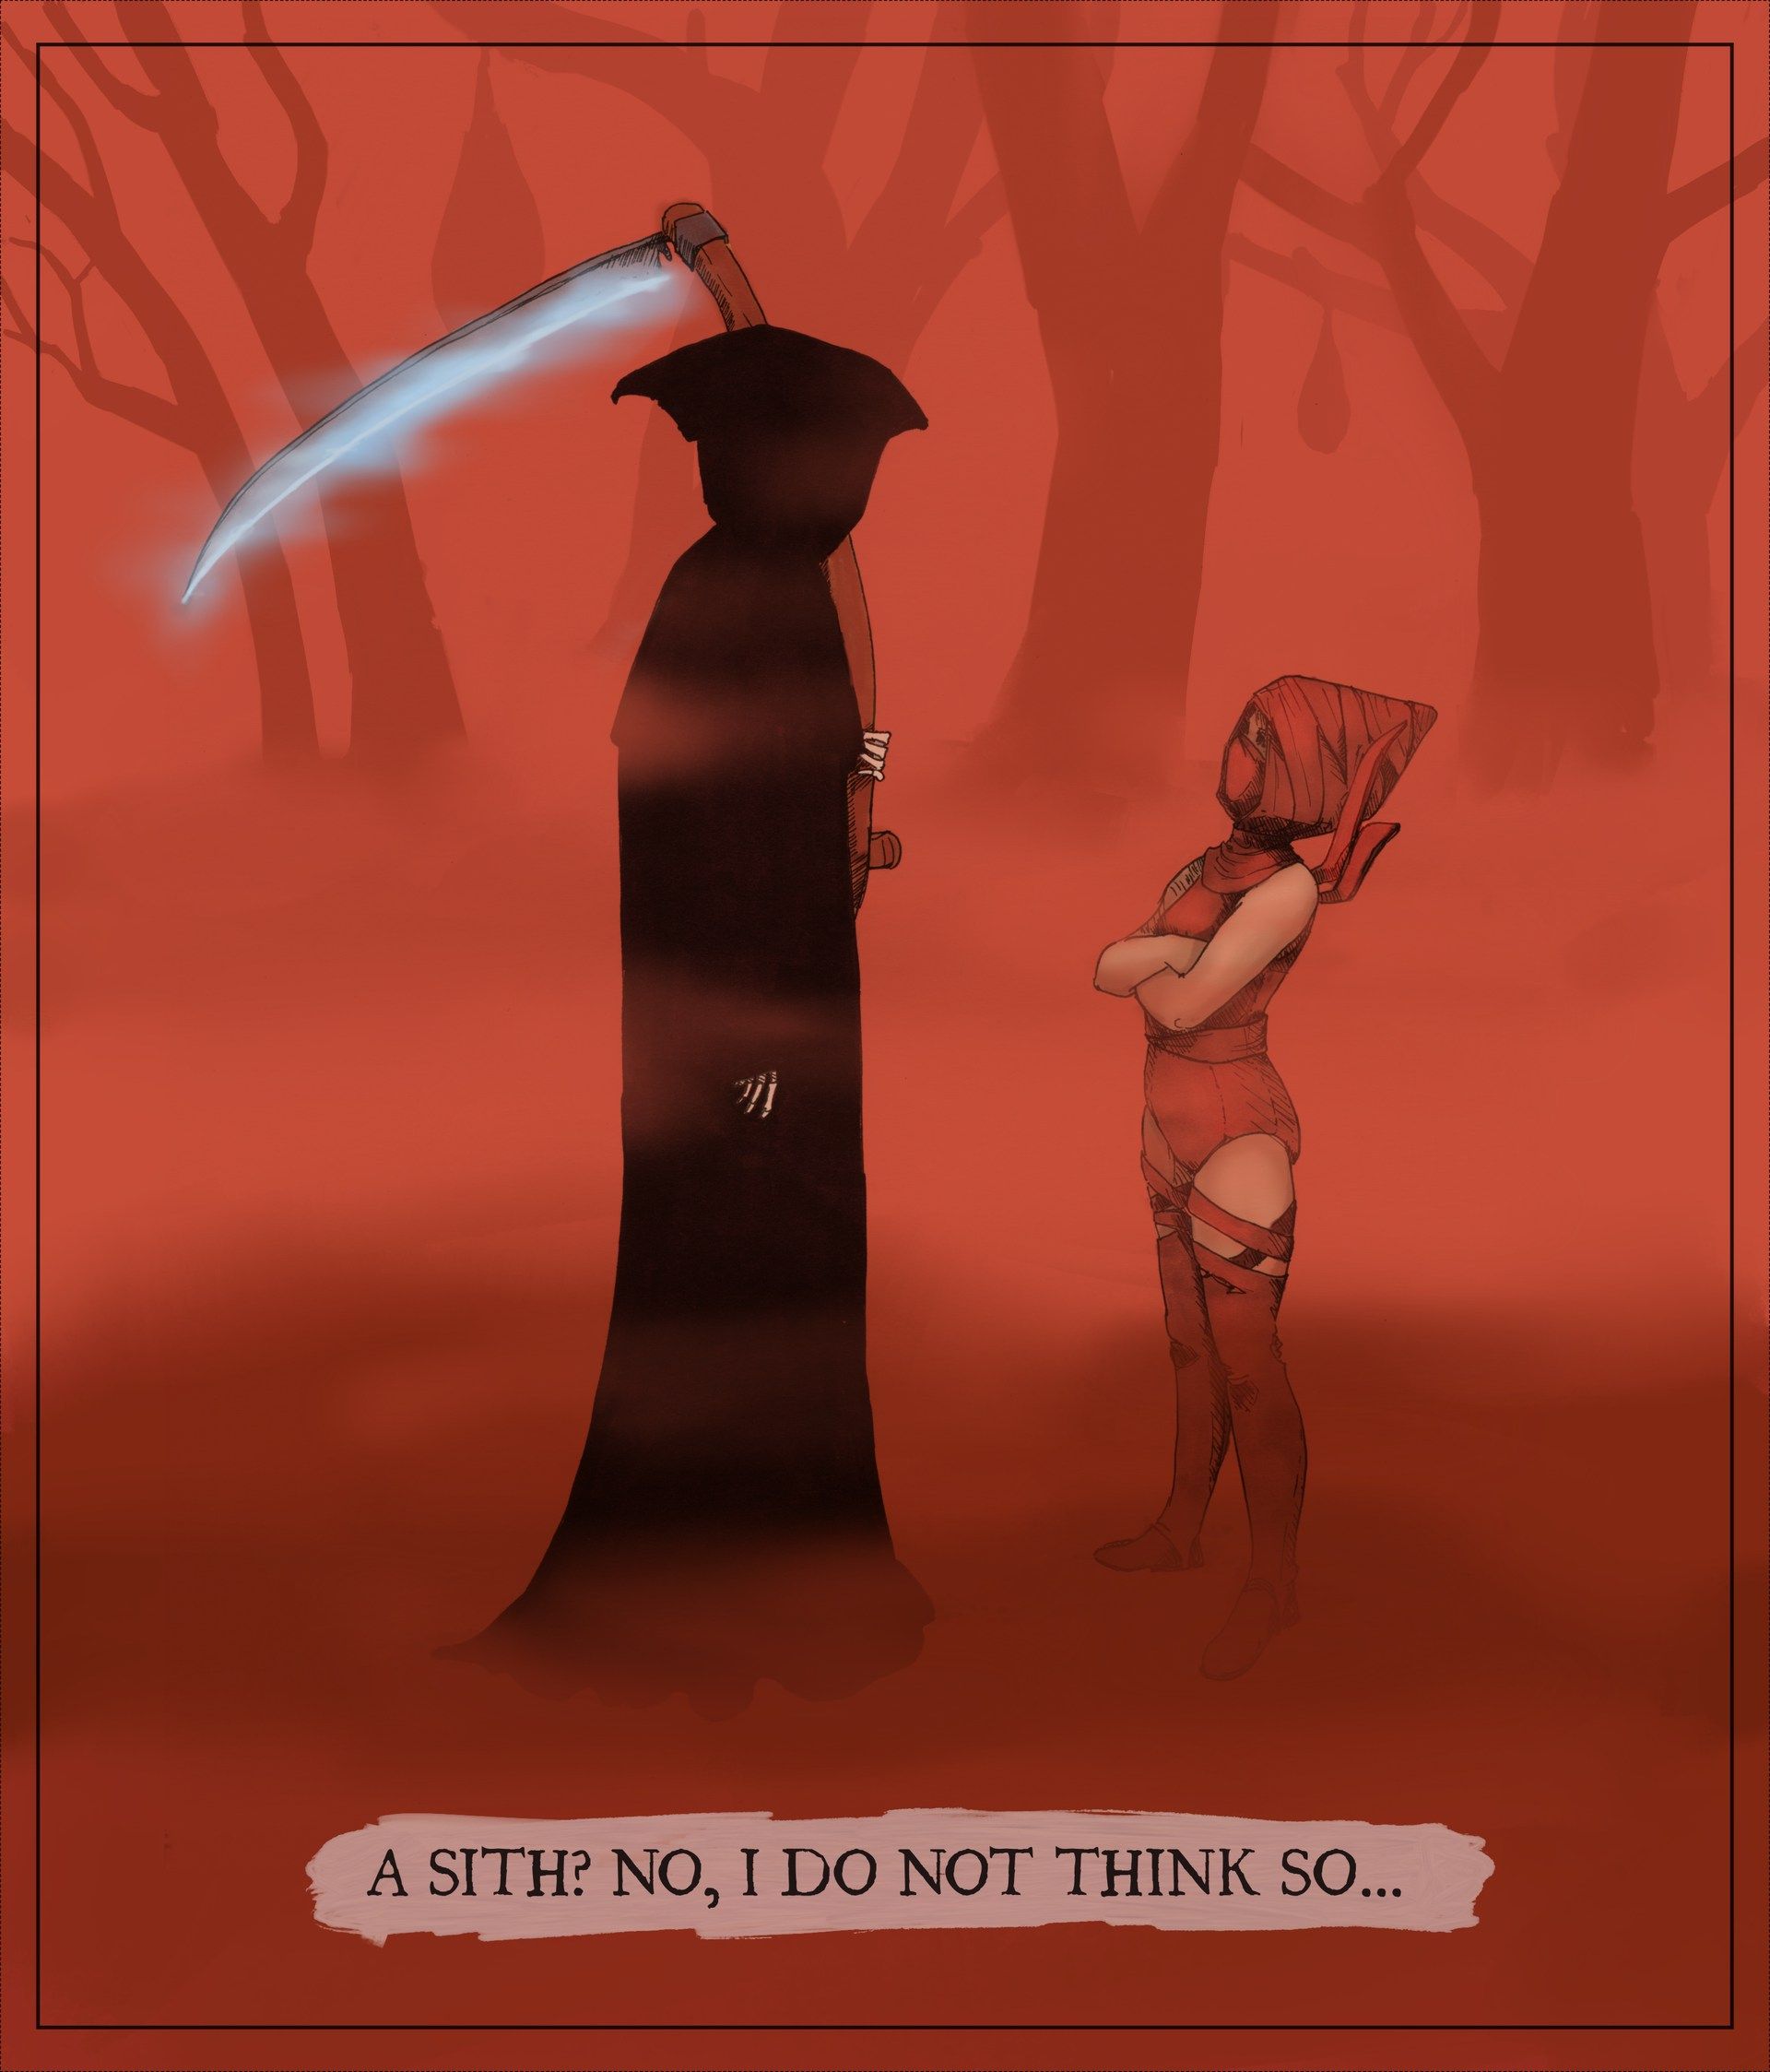 An inked and digitally finished illustration of the Death from Discord and a Dathomir Witch standing together in the corpse forest on Dathomir. He is only a tall, dark shape in a black robe, holding a scythe. She stares up at him with arms crossed. Under the illustration, there is a text in Death's usual capital letters: "A Sith? No, I do not think so..."